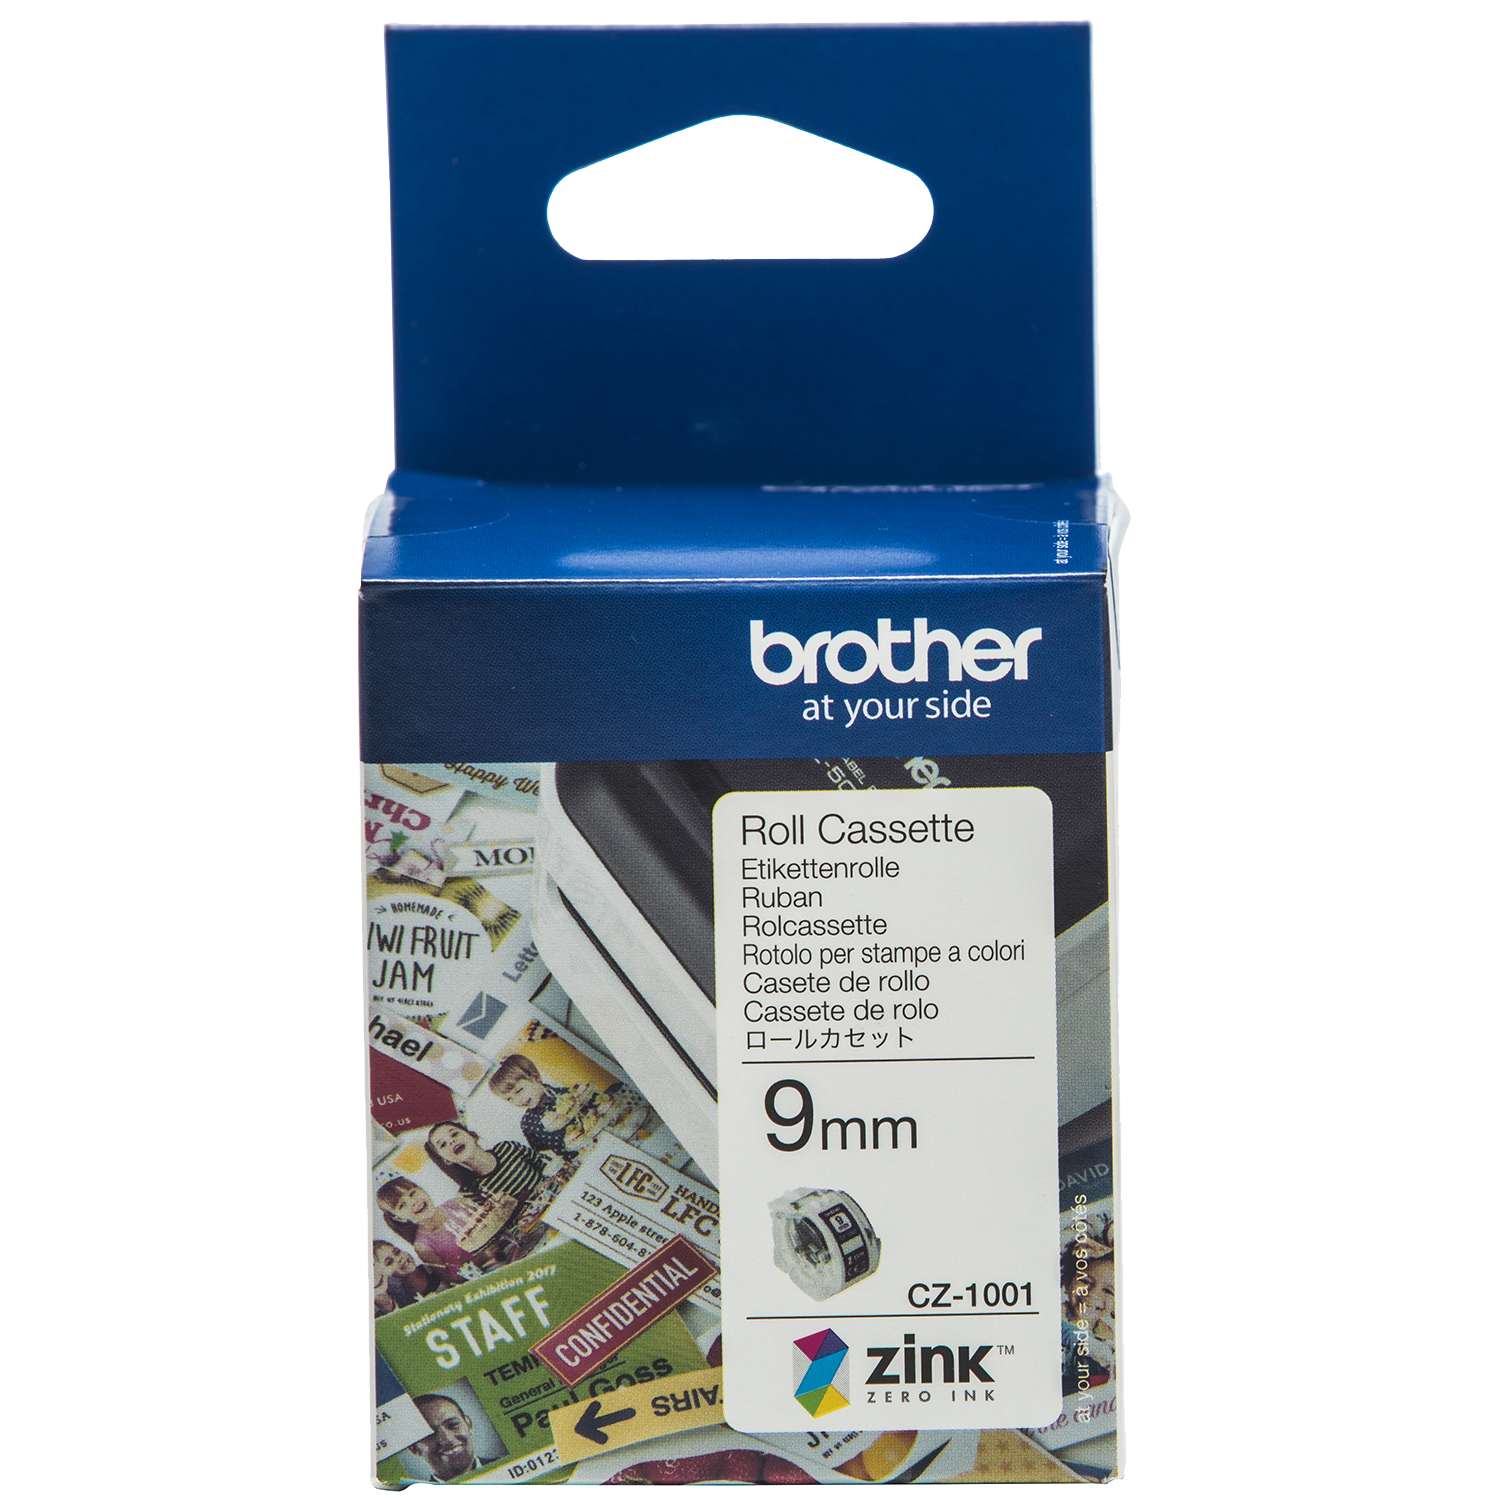 Brother CZ-1001 labeltape 9mm x 5m